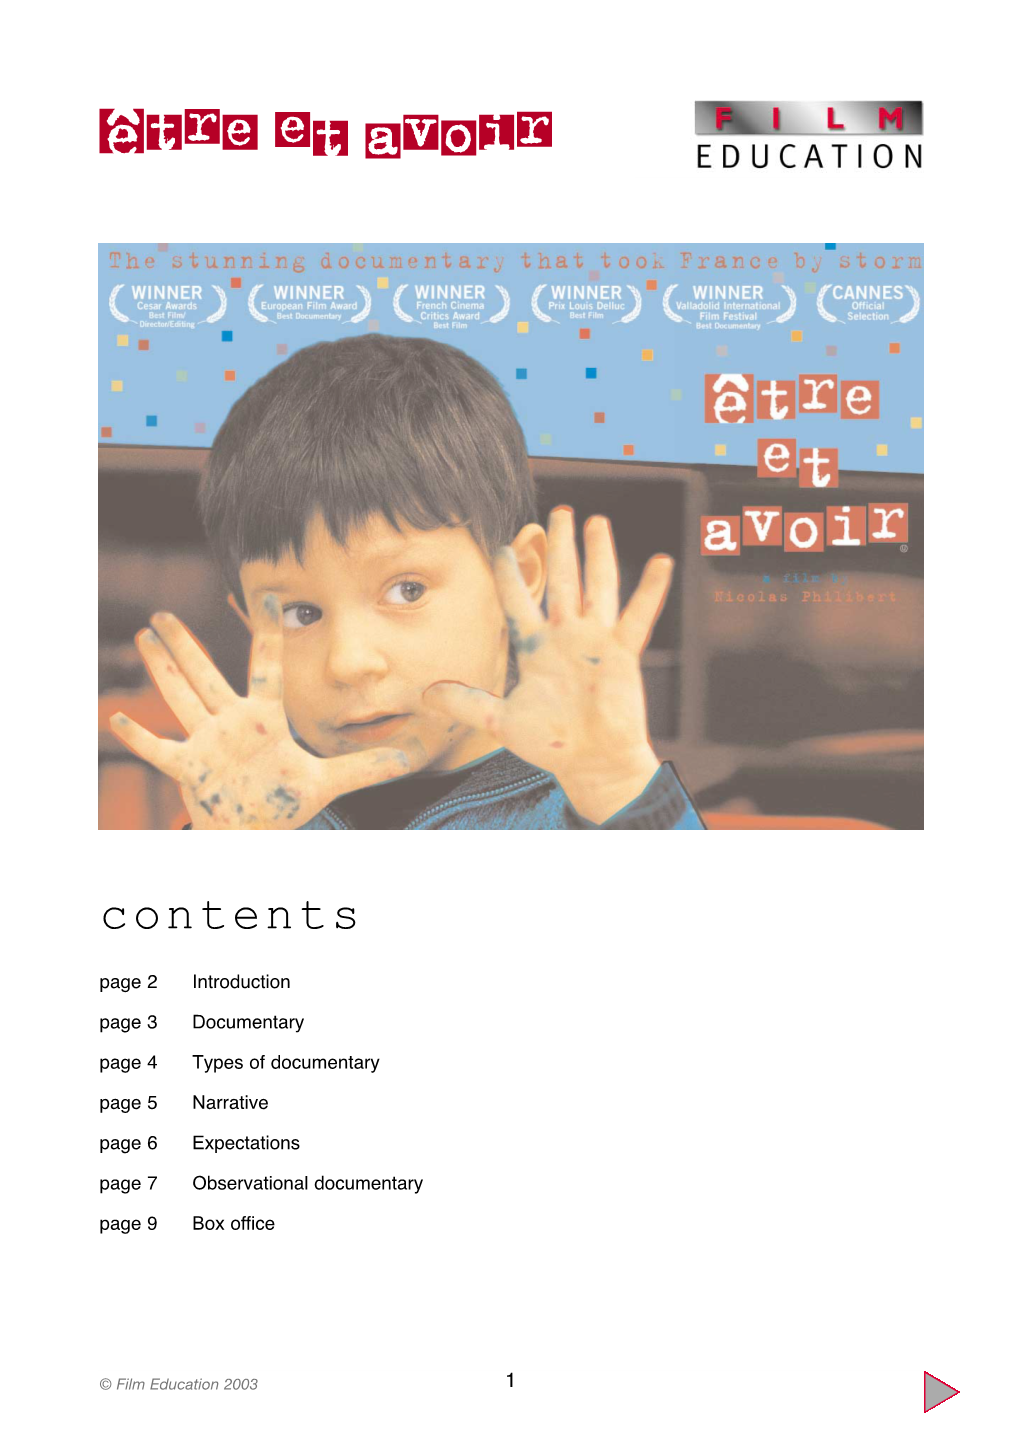 Contents Page 2 Introduction Page 3 Documentary Page 4 Types of Documentary Page 5 Narrative Page 6 Expectations Page 7 Observational Documentary Page 9 Box Office